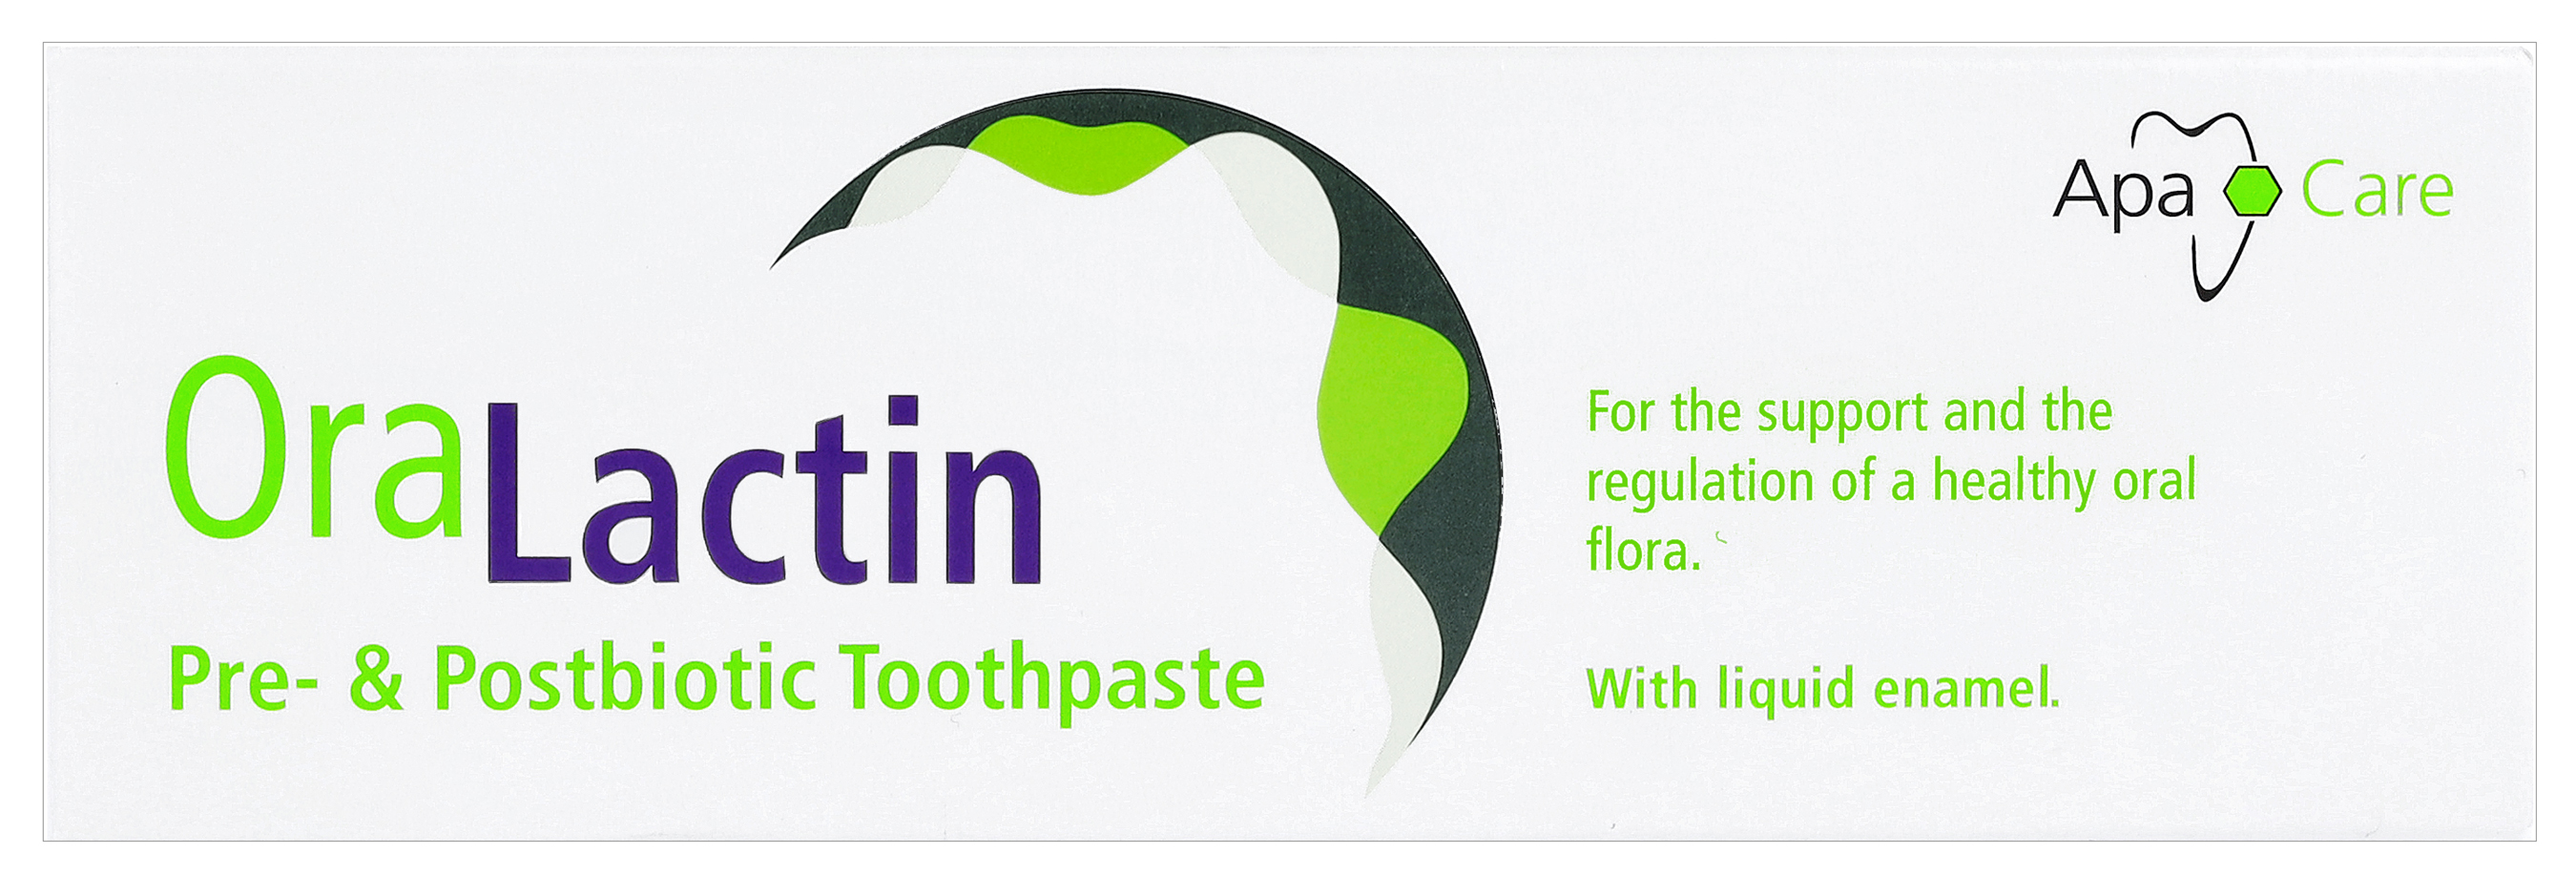 Pre- and postbiotic Toothpaste